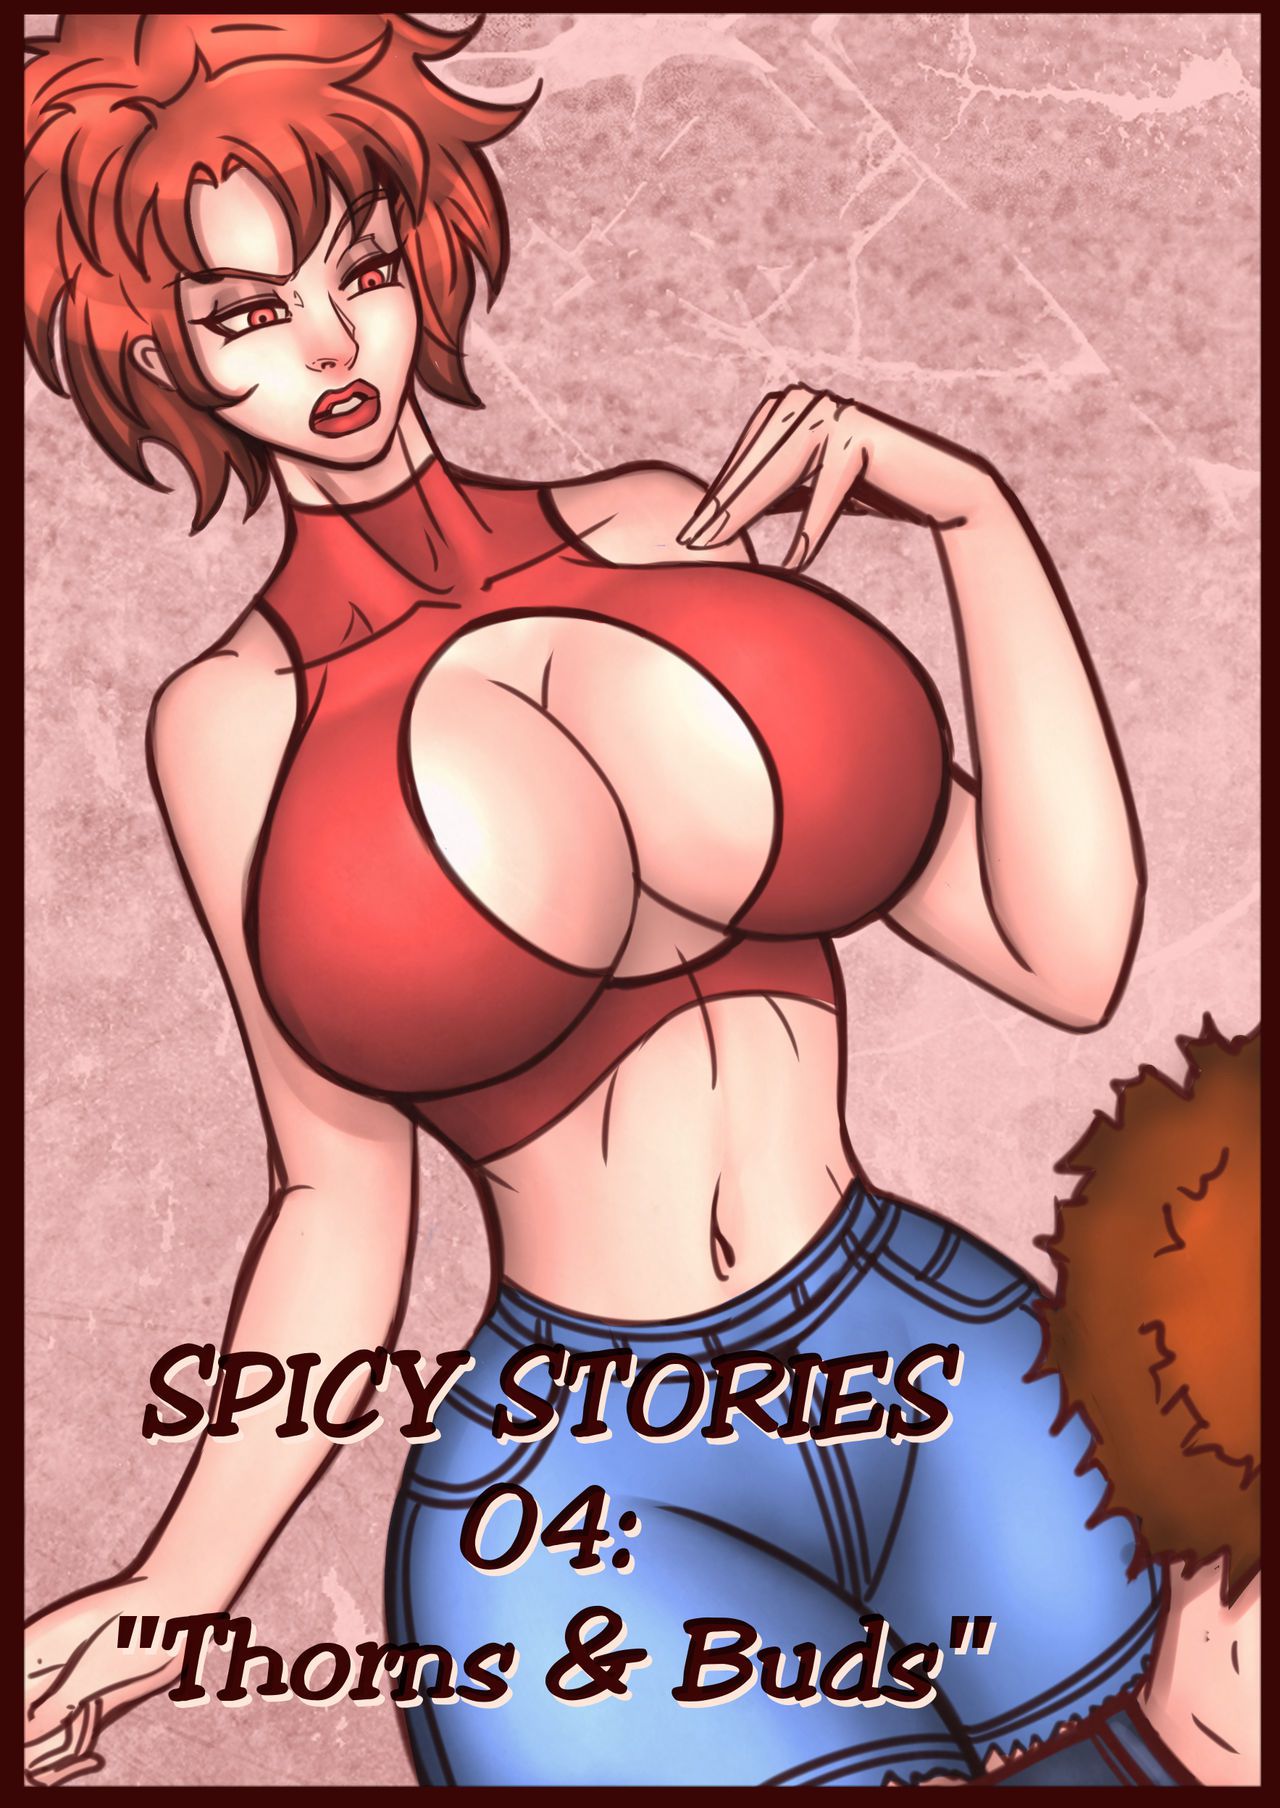 NGT Spicy Stories 04 - Thorns & Buds (English) (Ongoing) NGT Spicy Stories 04 - Thorns & Buds 6